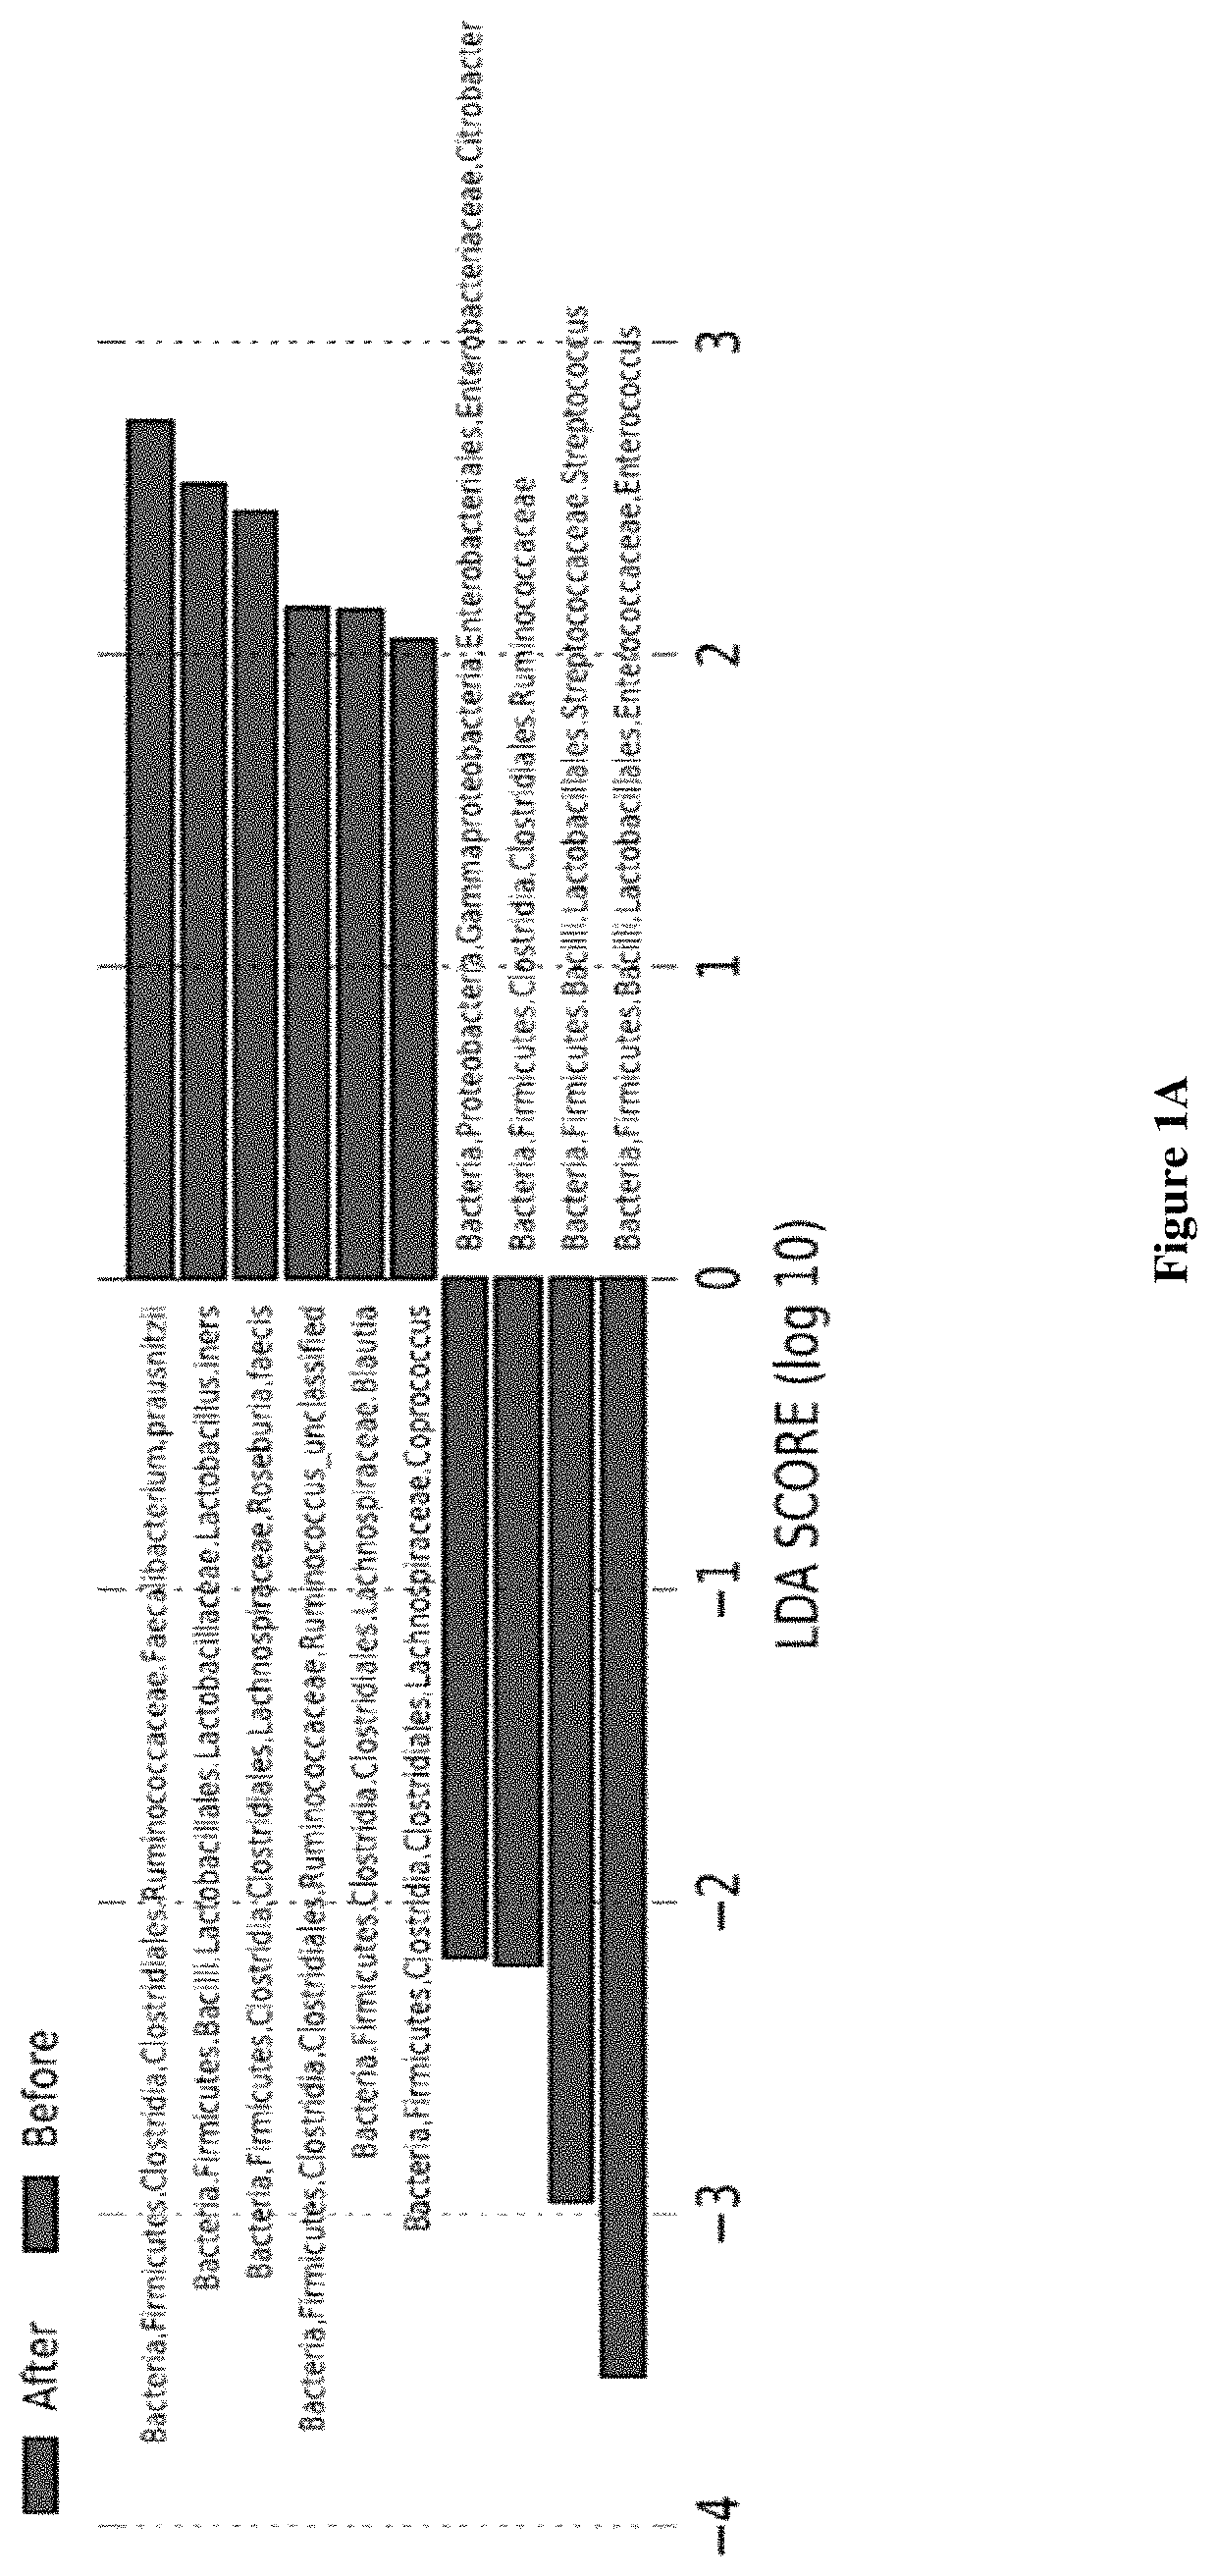 Inulin for preventing antibiotic resistant infection and pathogen colonization